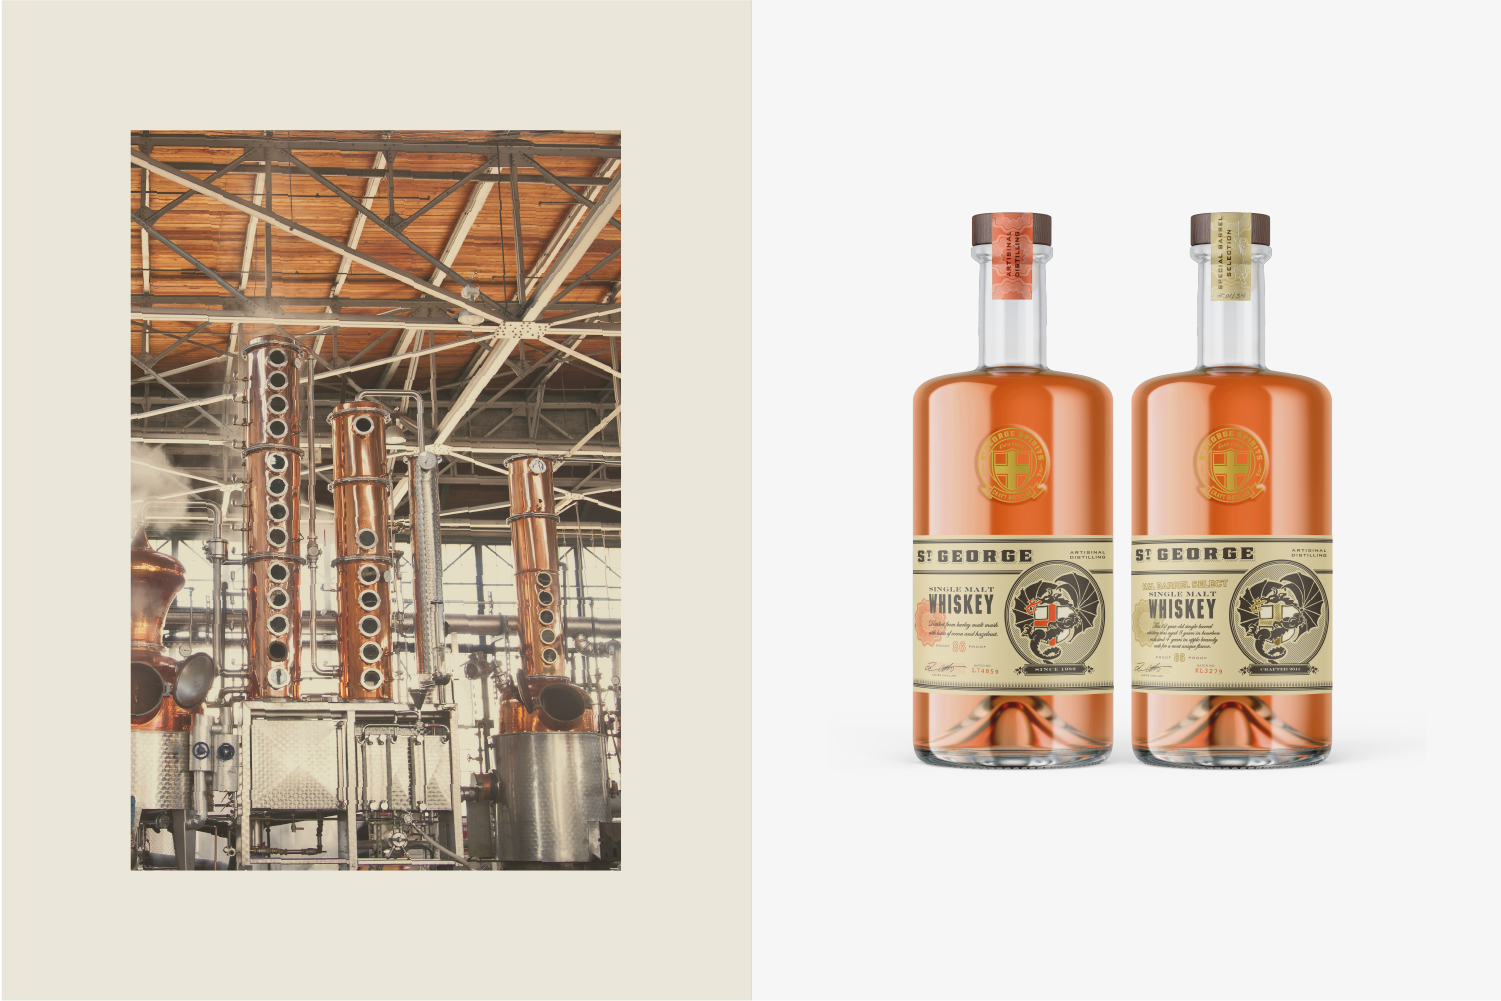 St. George Spirits Single Malt Whiskey Packaging concept and St. George Spirits distillery interior.